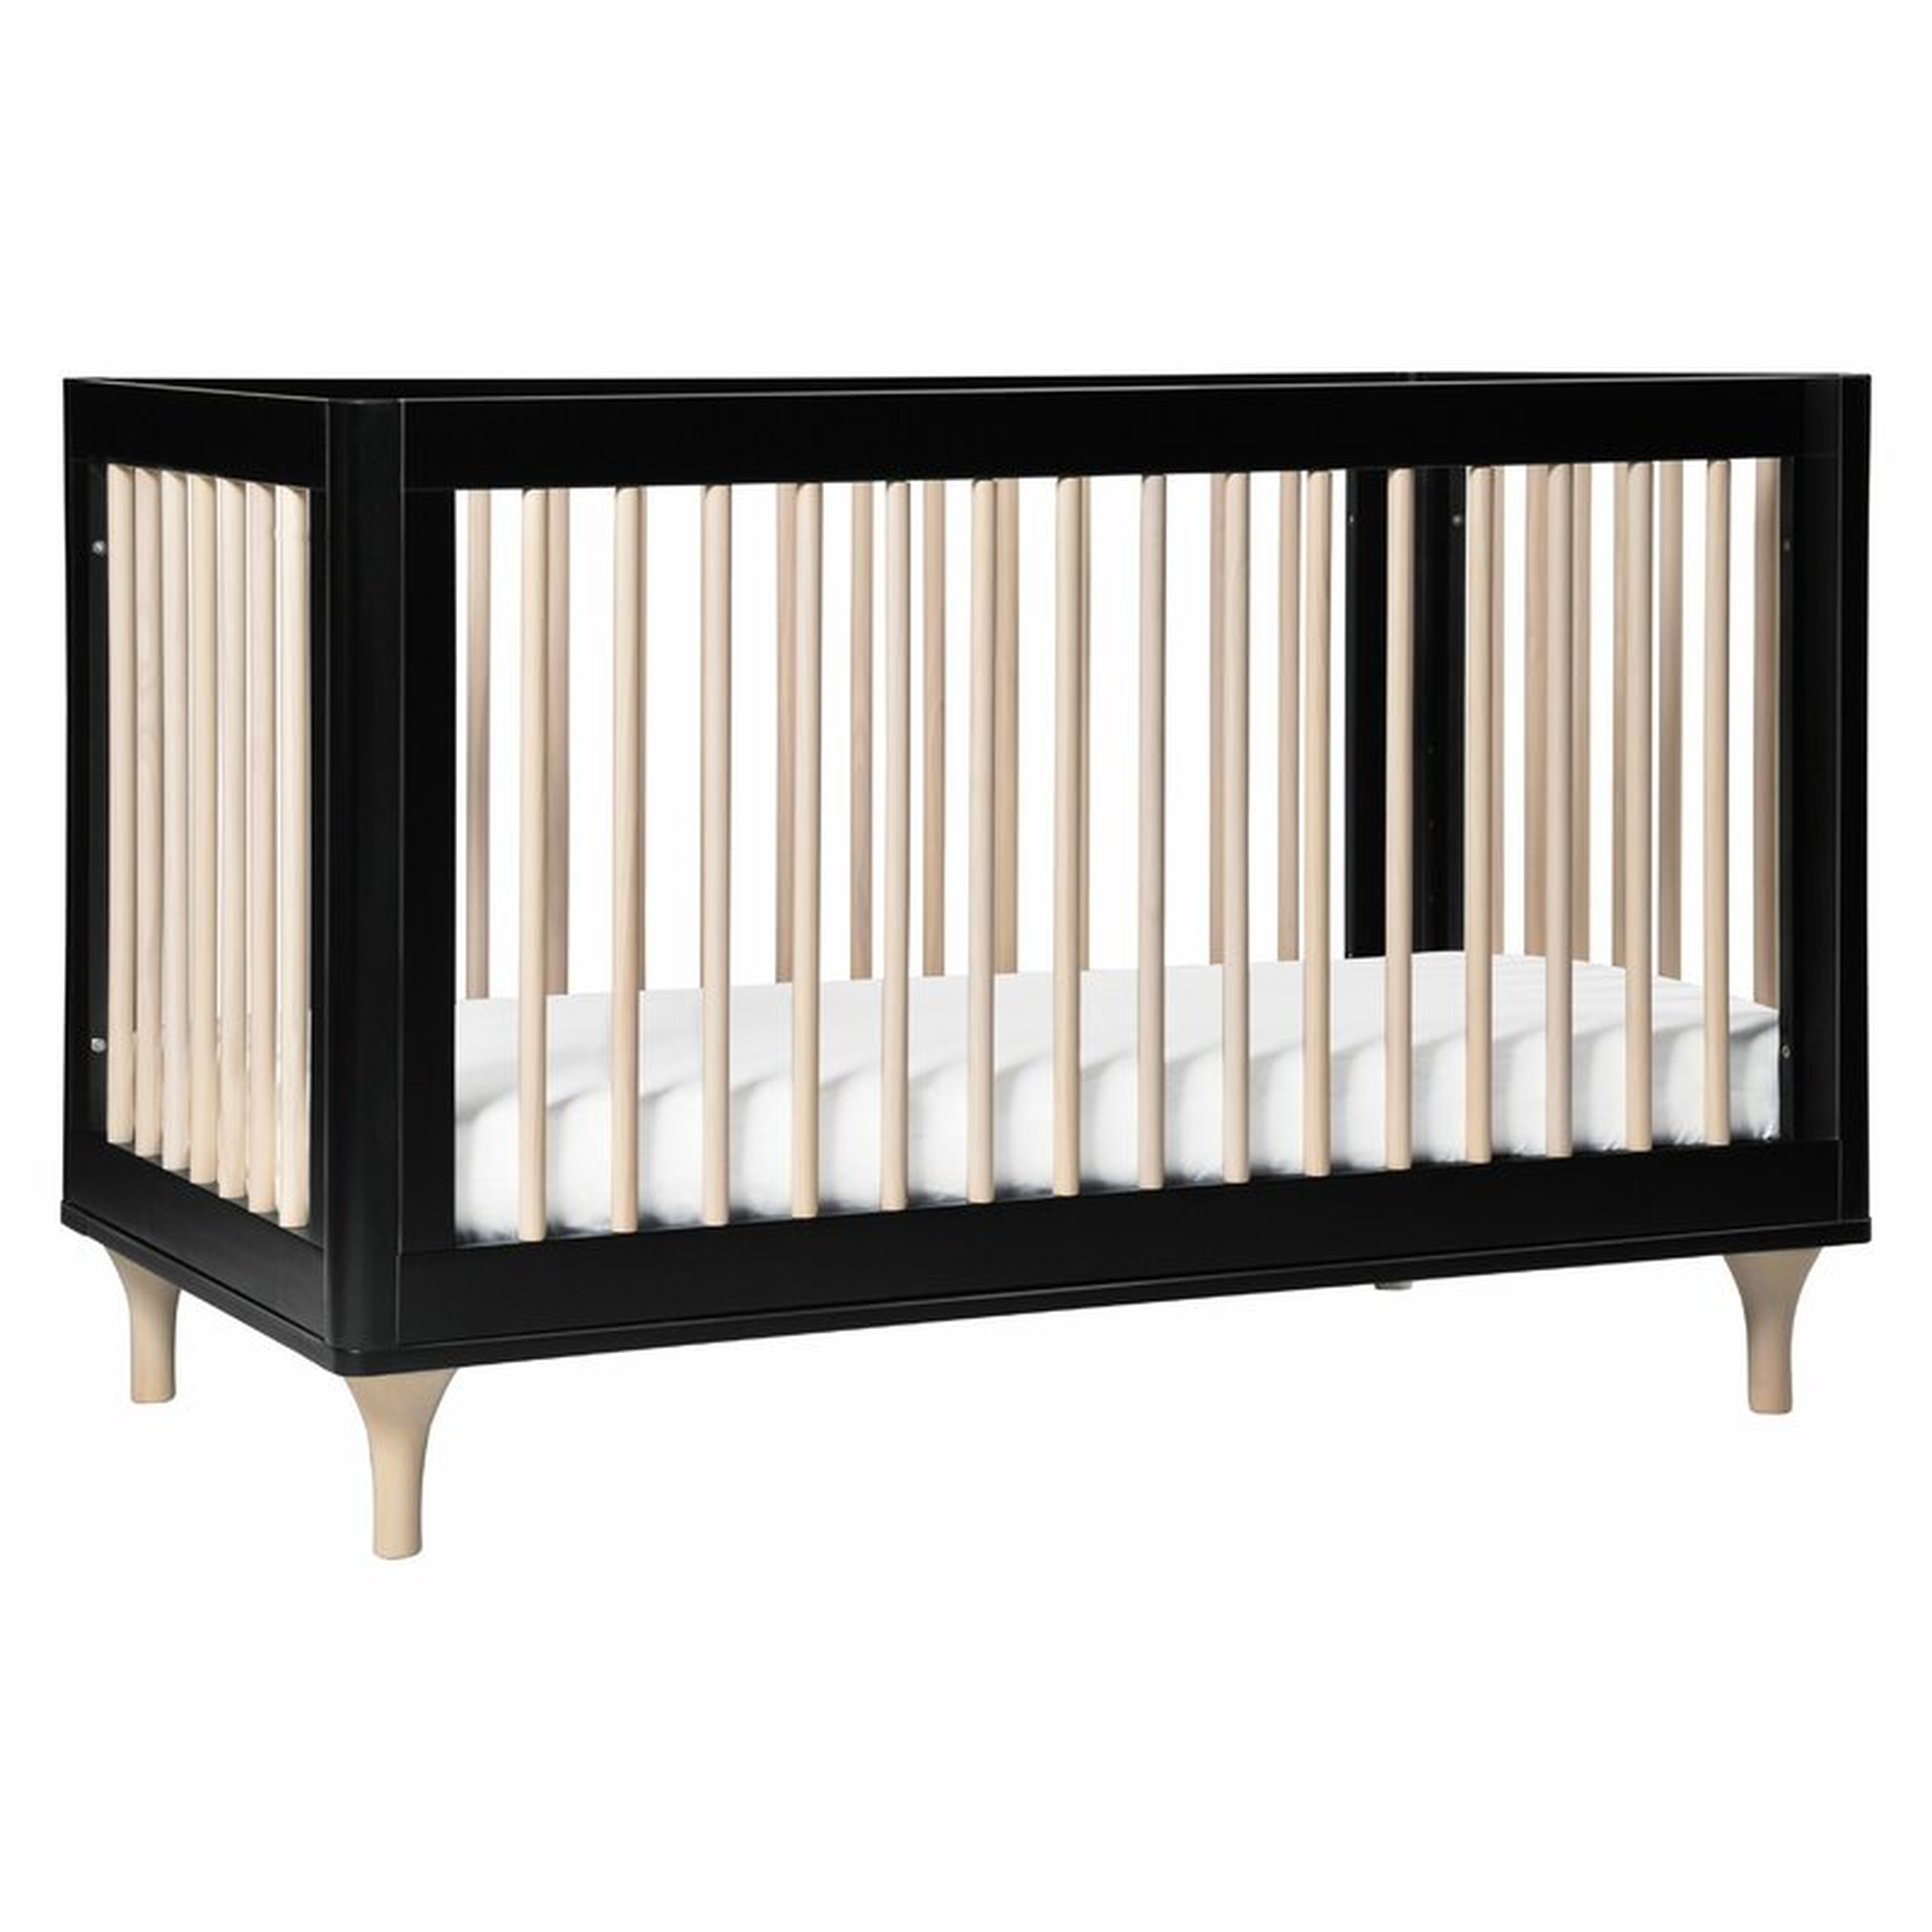 Lolly 3-in-1 Convertible Crib Color: Black/Washed Natural - Perigold